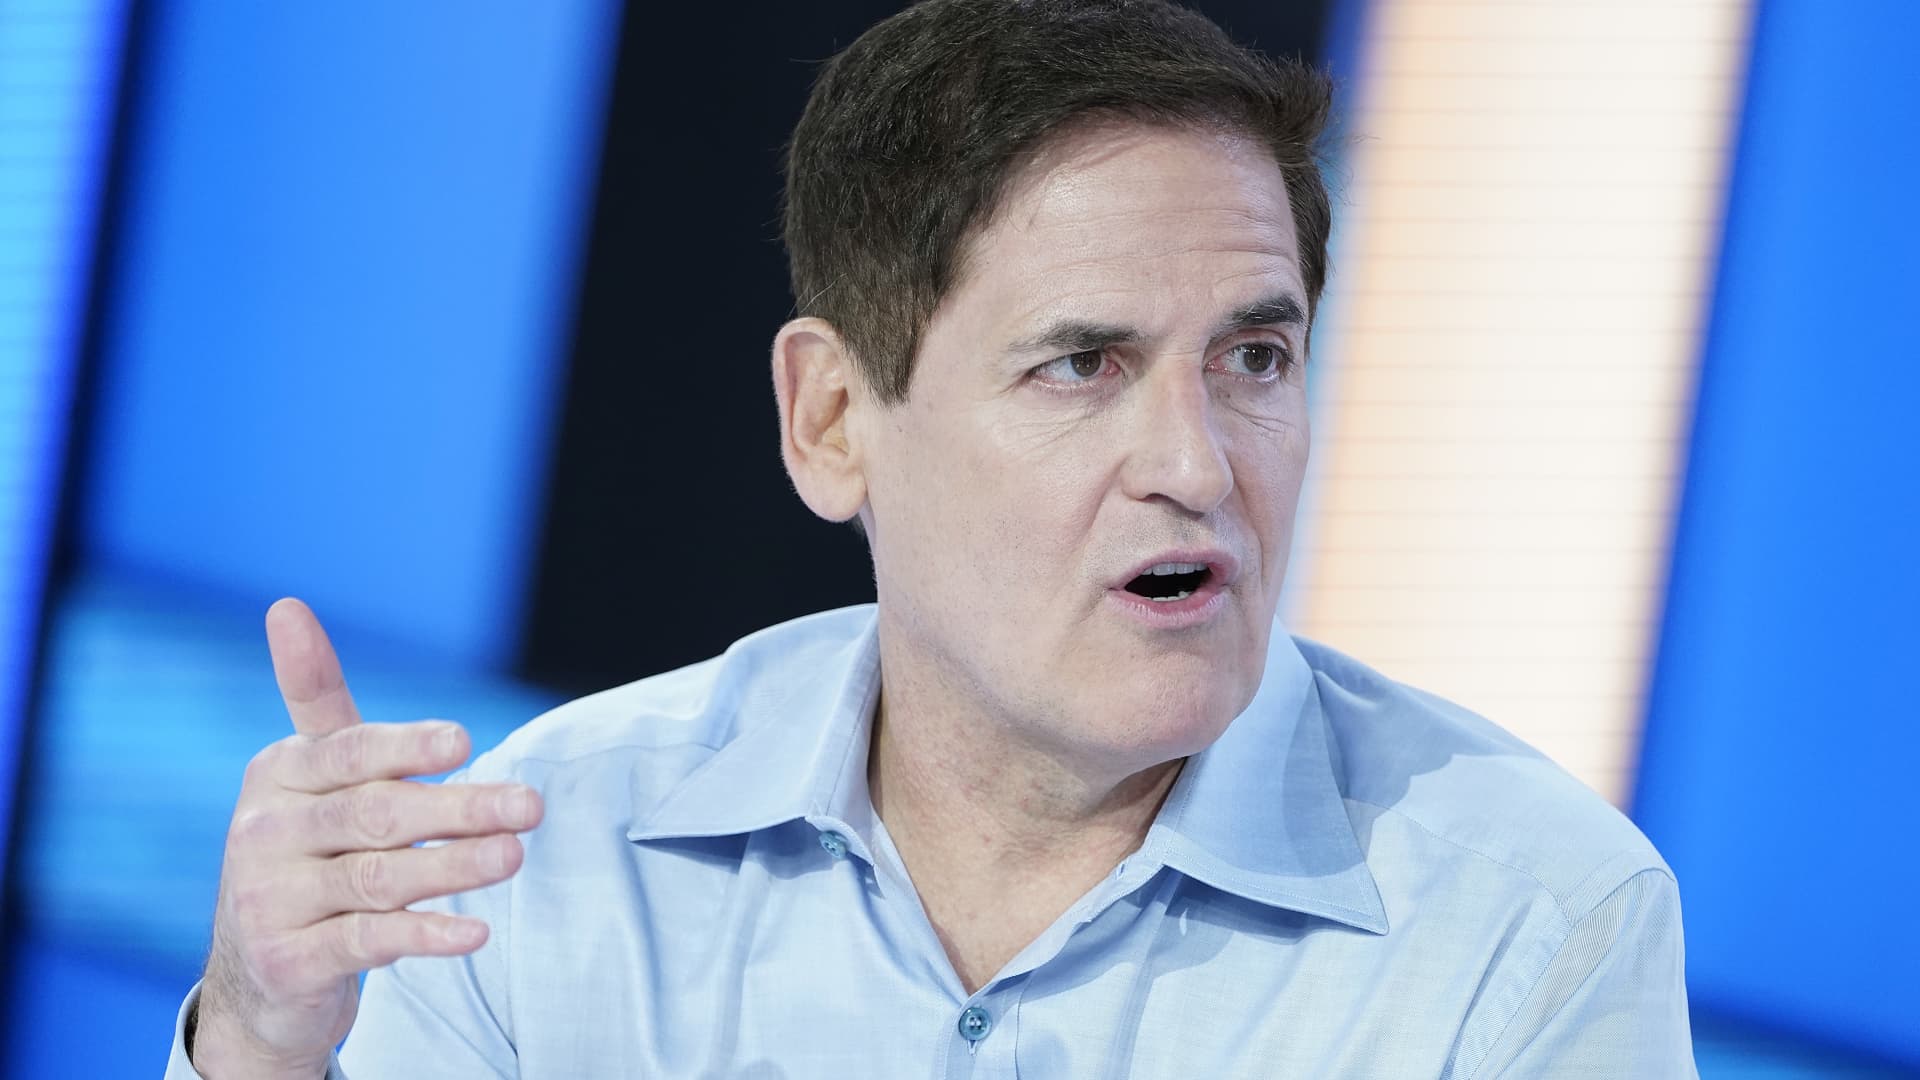 Mark Cuban wants to buy more bitcoin, says gold investors are 'dumb'